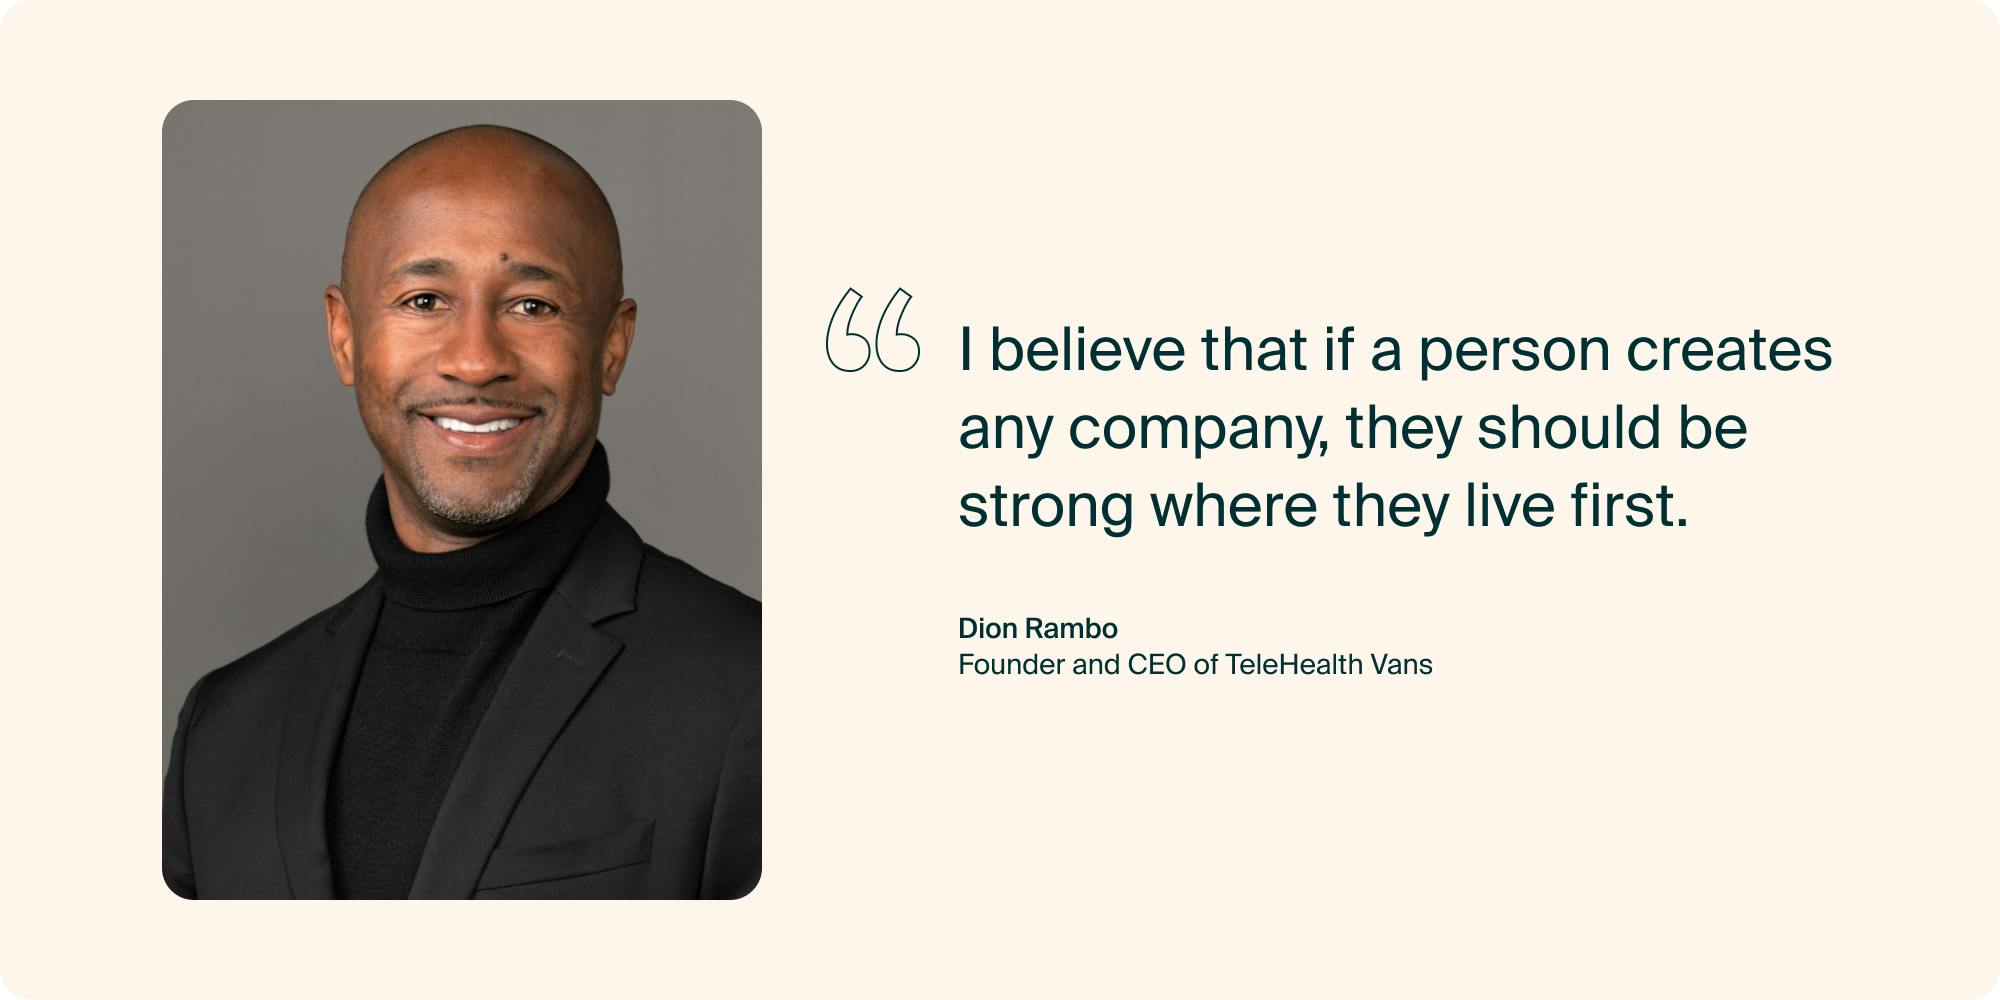 "I believe that if a person creates any company, they should be strong where they live first." –Dion Rambo, Founder and CEO of TeleHealth Vans